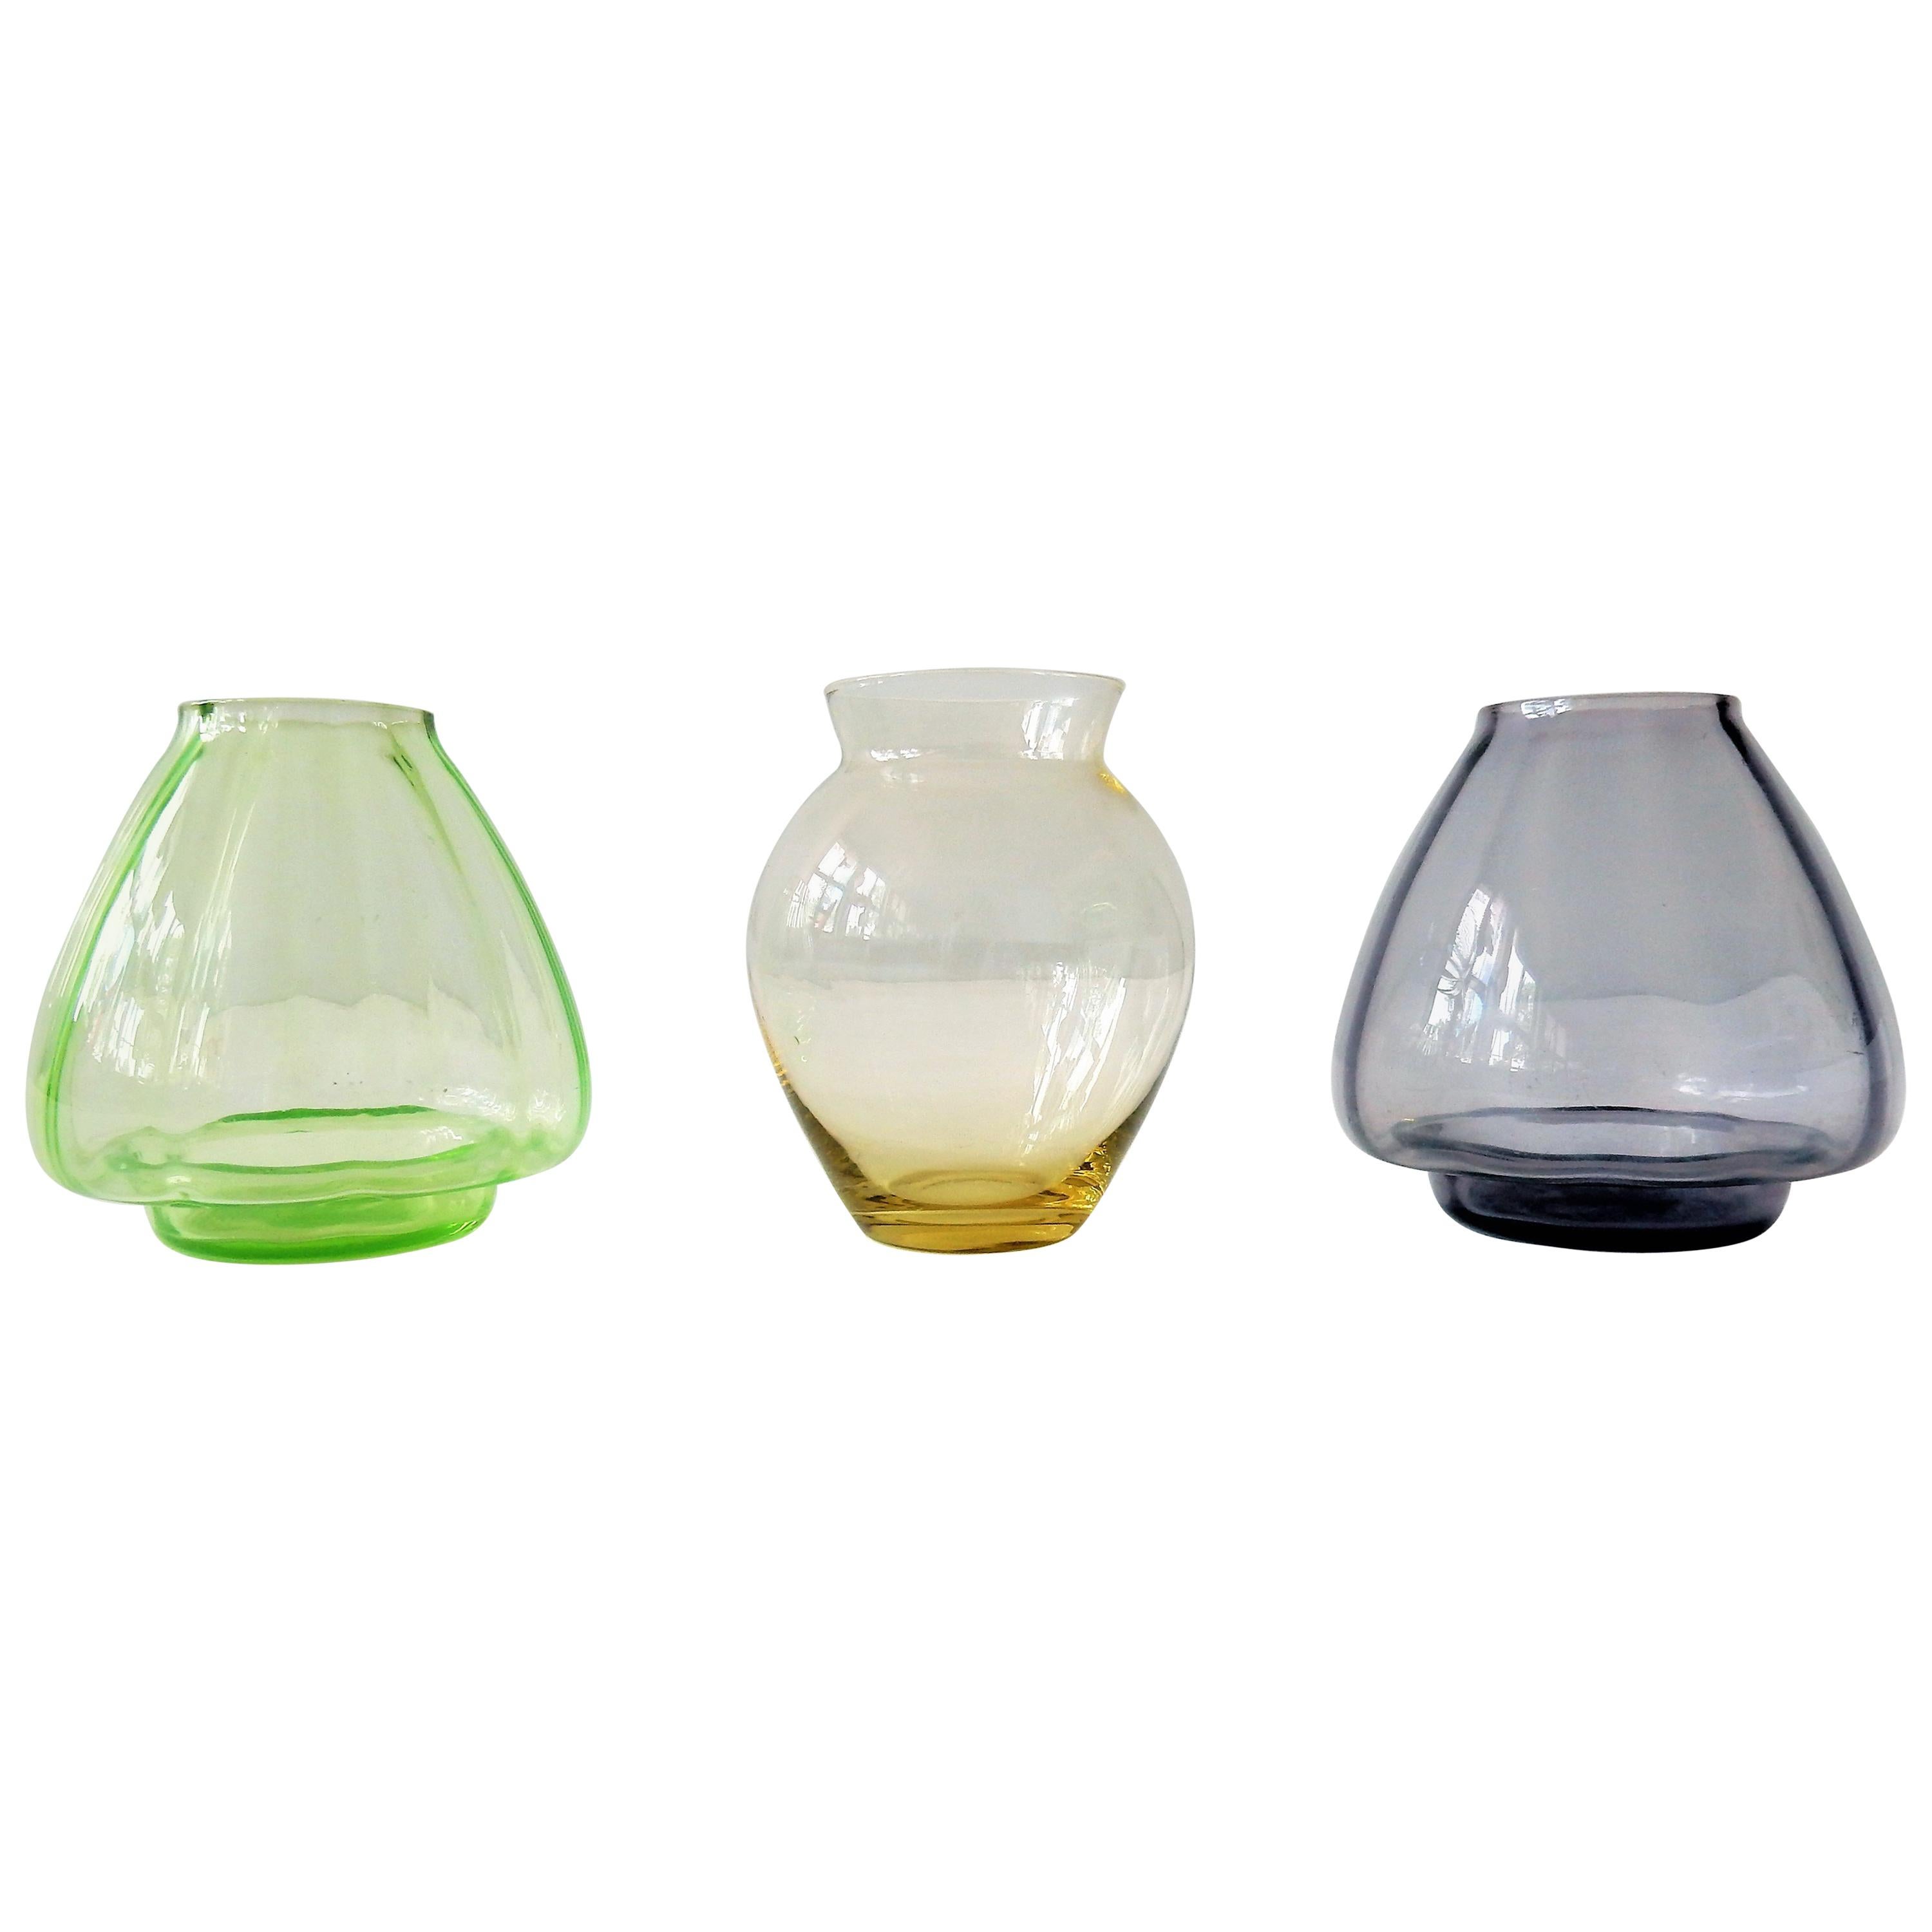 Set of Three Small Colored Glass Vases by A.D. Copier, the Netherlands, 1930s